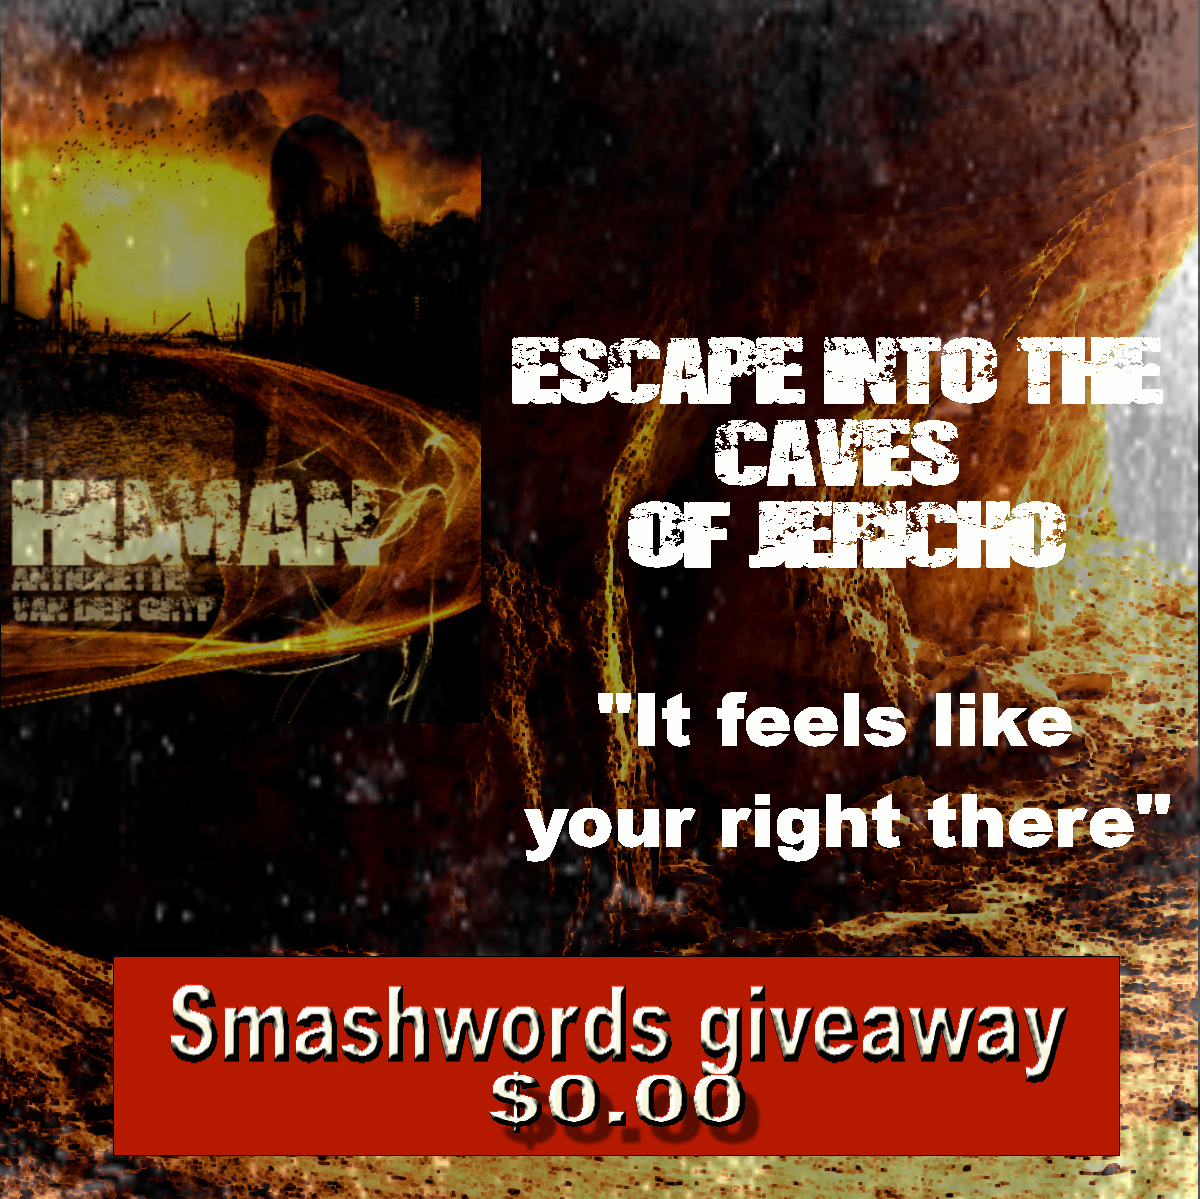 Giveaway until 28th April at Smashwords. If you haven't read Human yet, here is your chance! smashwords.com/books/view/145…
#bookgiveaway #Giveaway #free